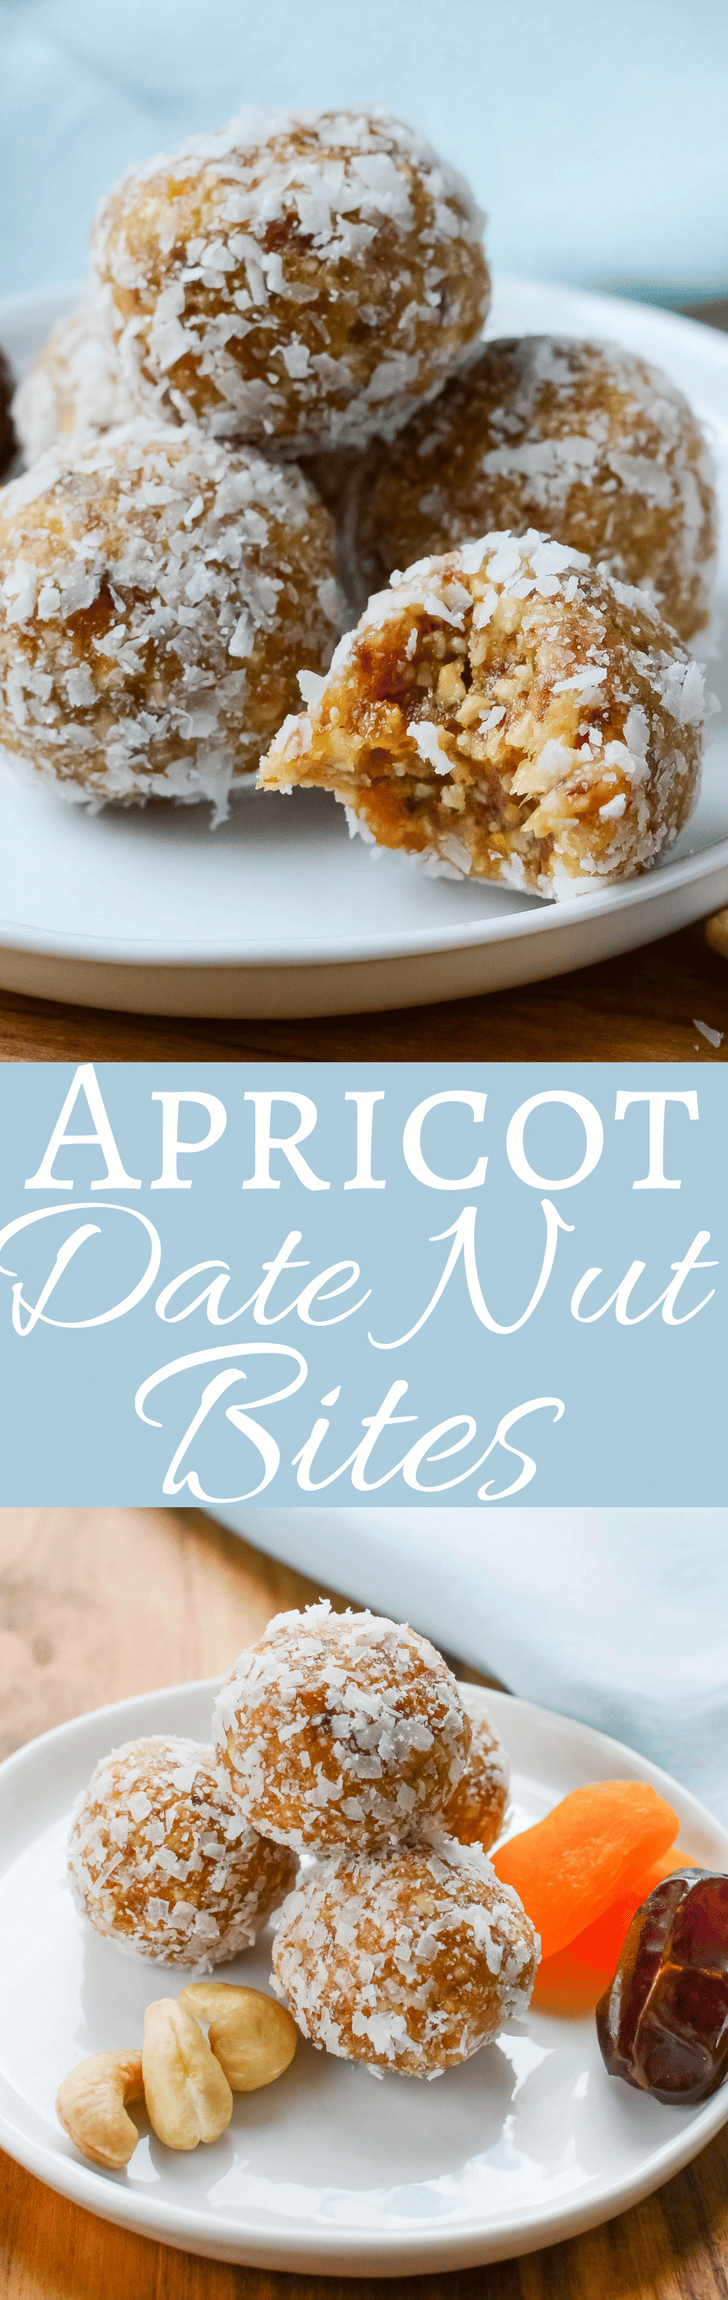 An easy, healthy snack recipe that only takes a few minutes to make. Apricot Date Nut Bites are all natural with no processed sugar or fake ingredients. 